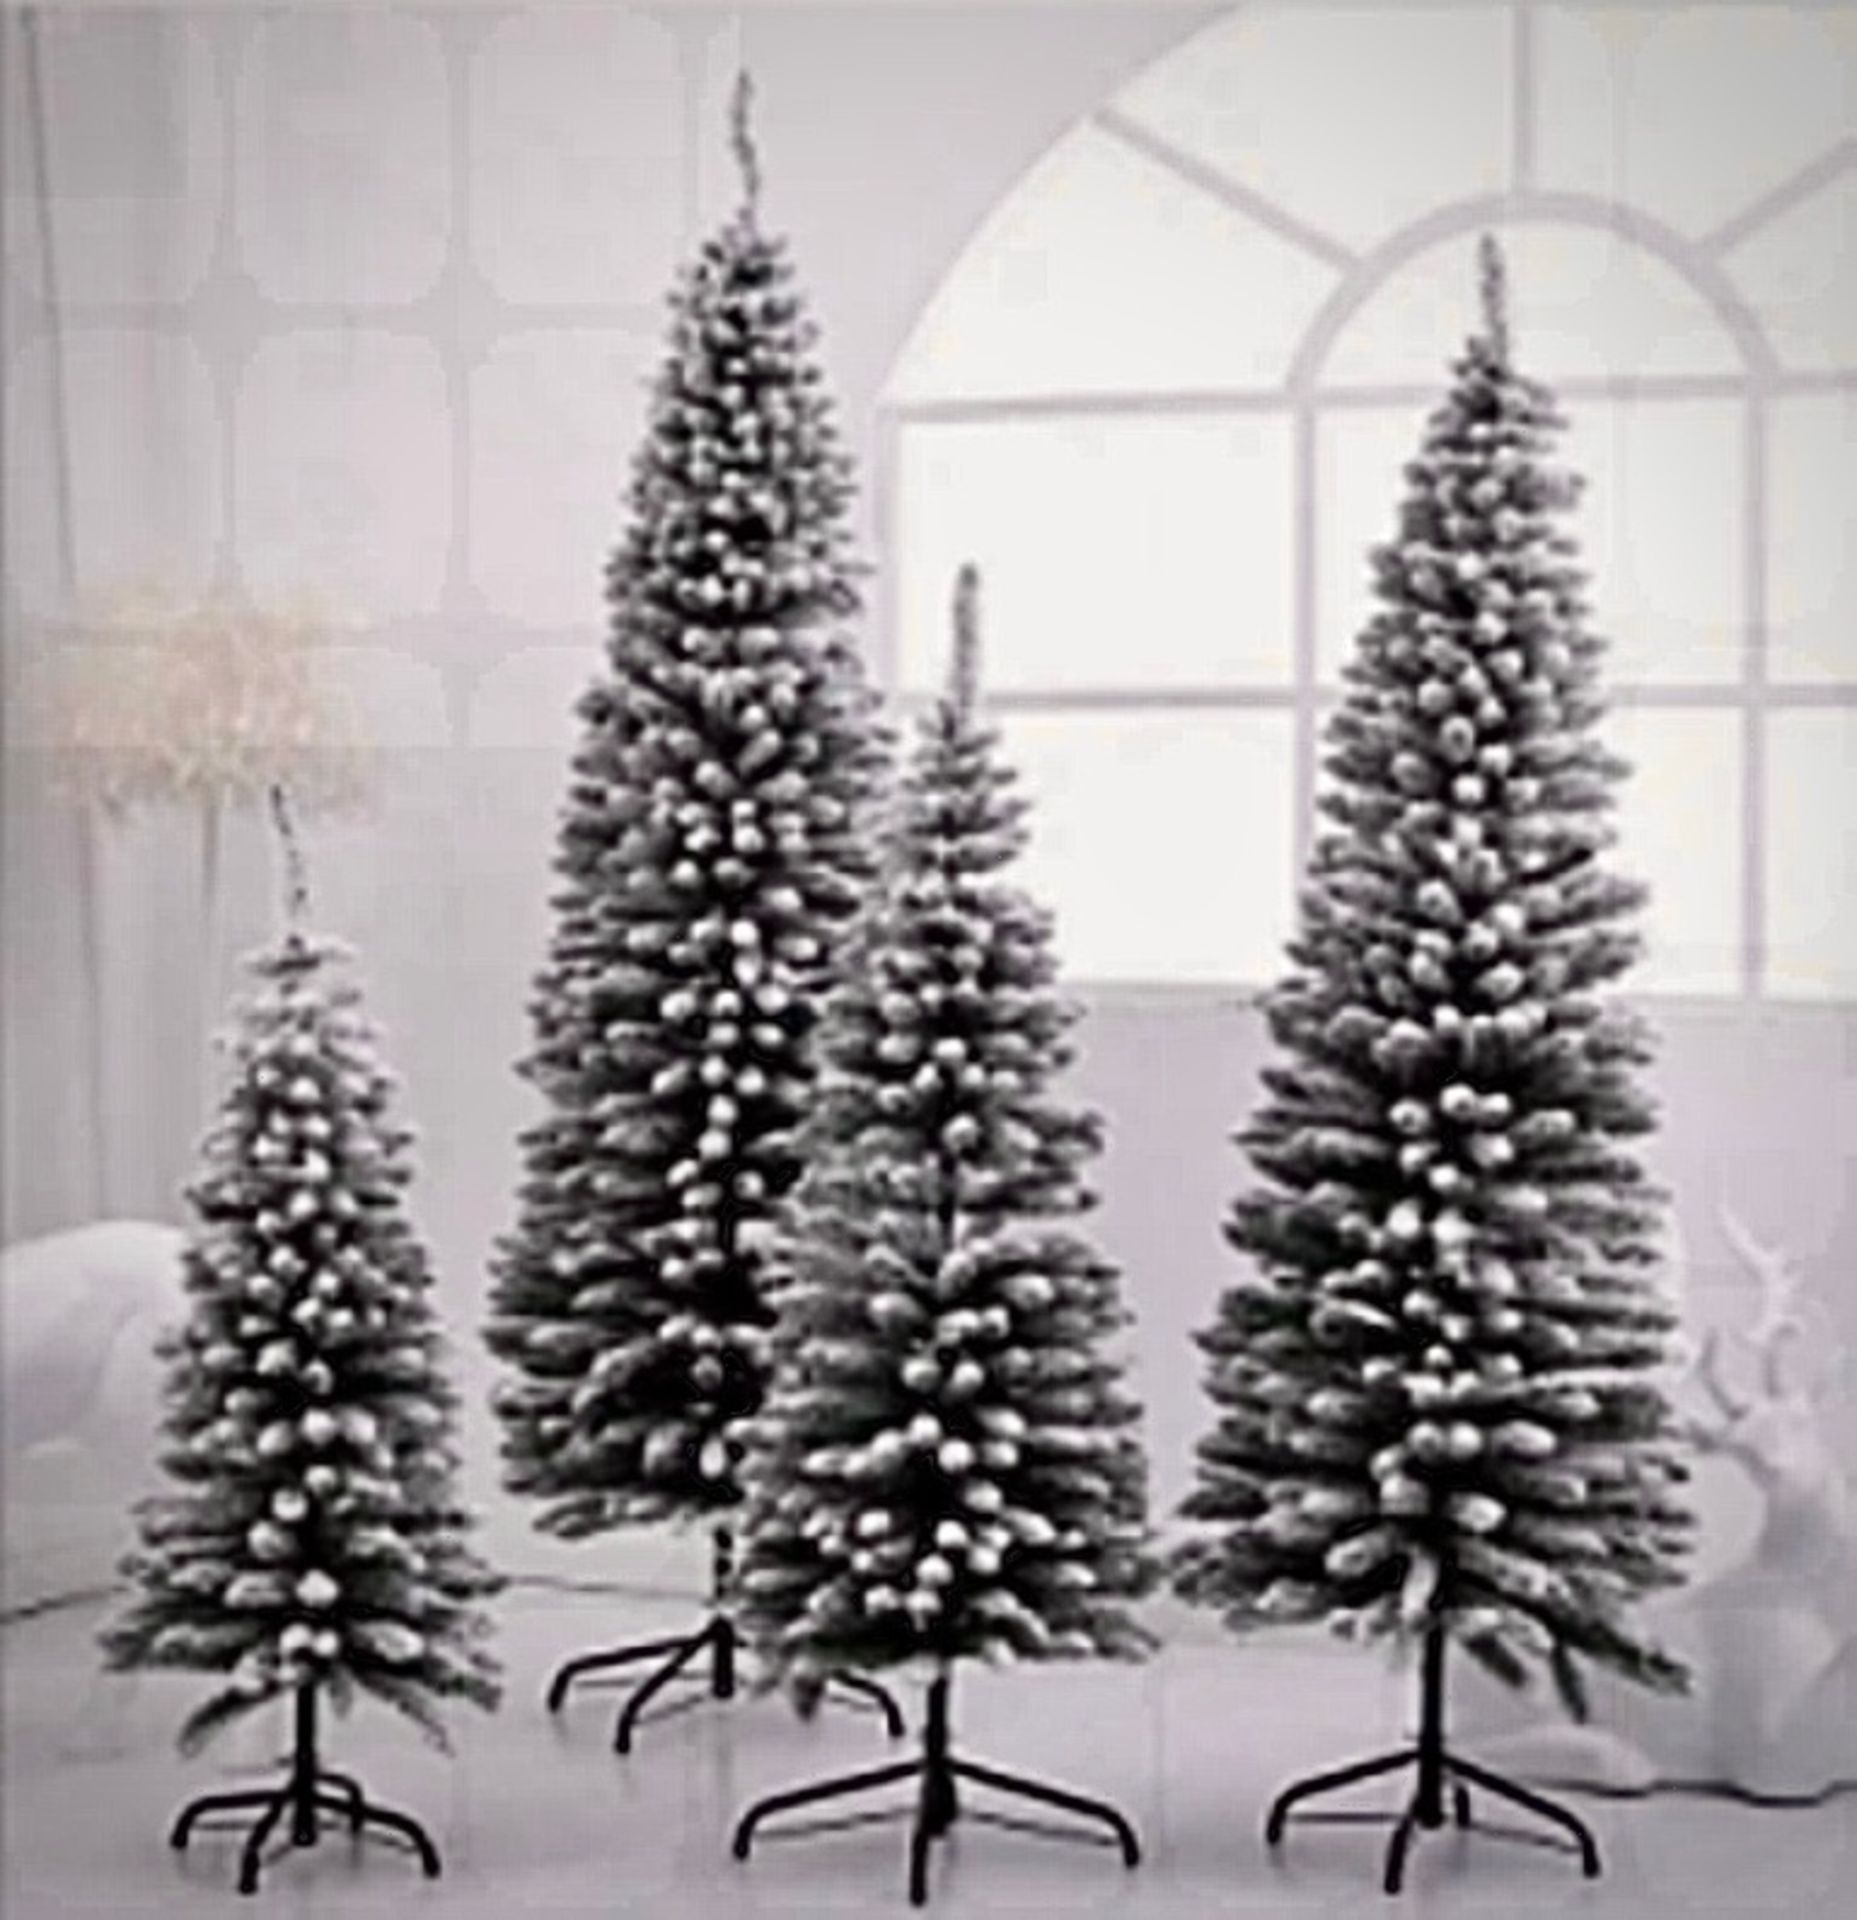 8 x 5ft Christmas Tree Artificial with Snow Frosted Tips Slim Pencil Shape